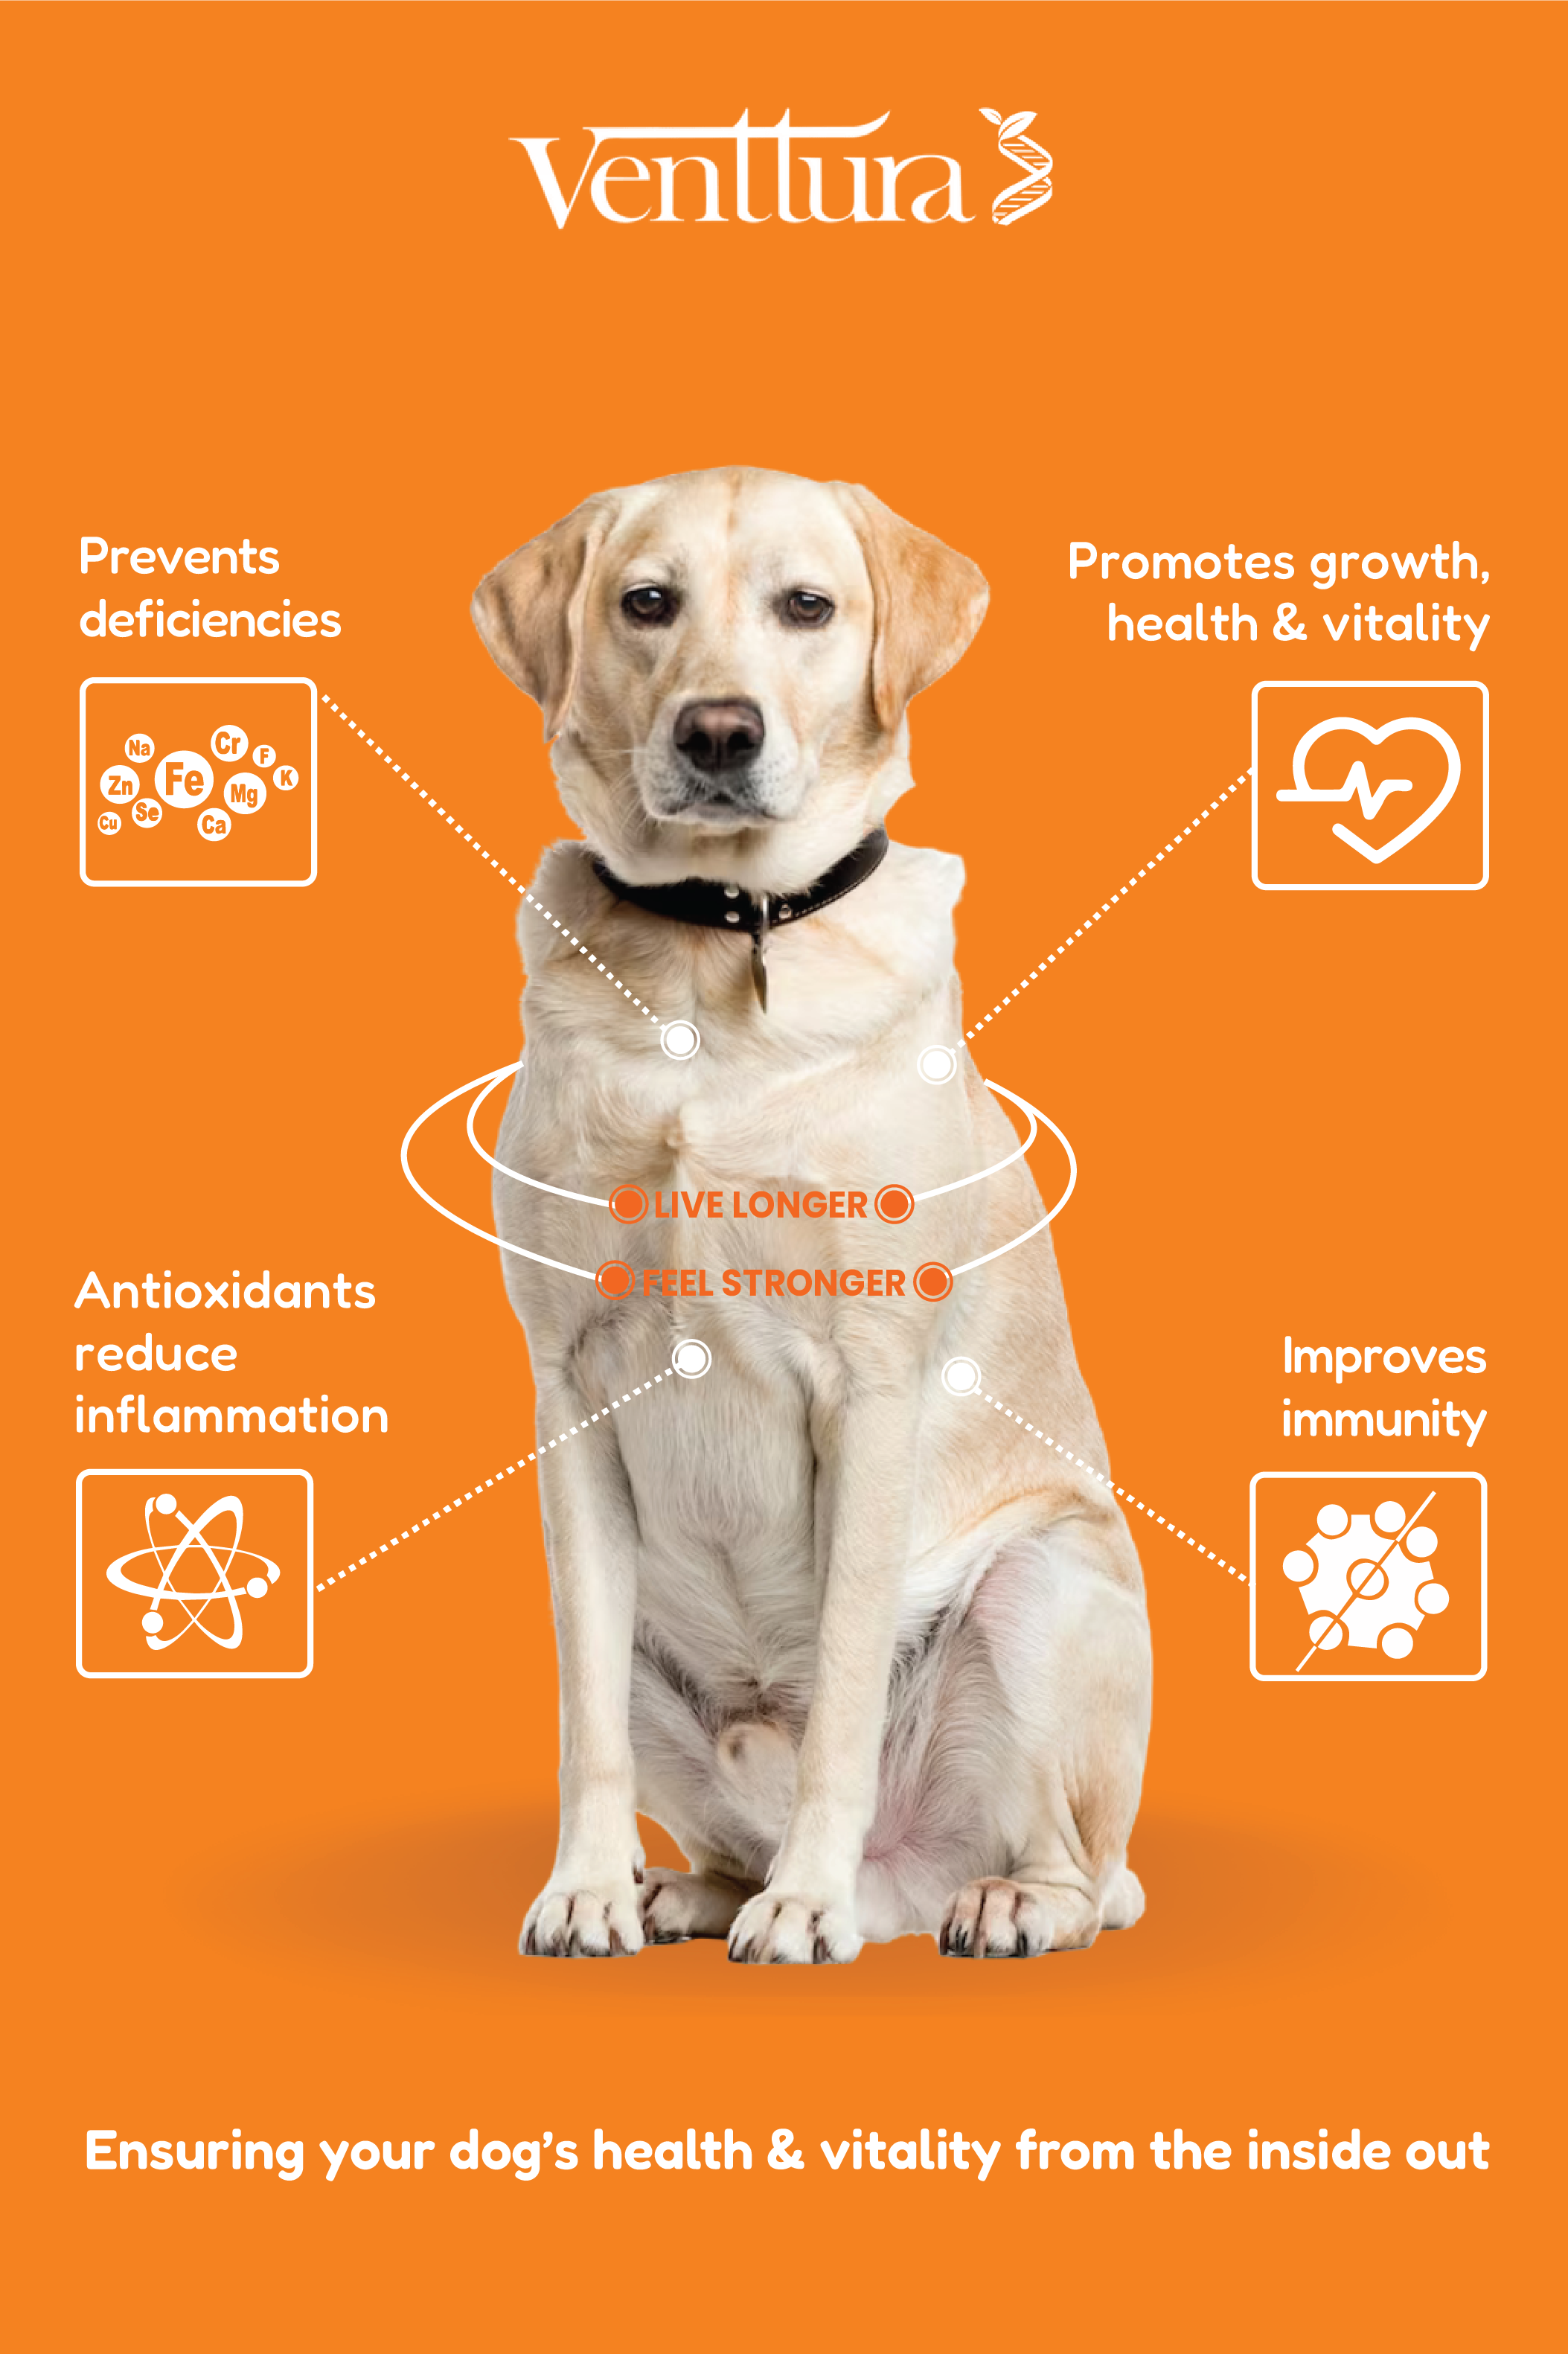 High-quality pet care products for immunity